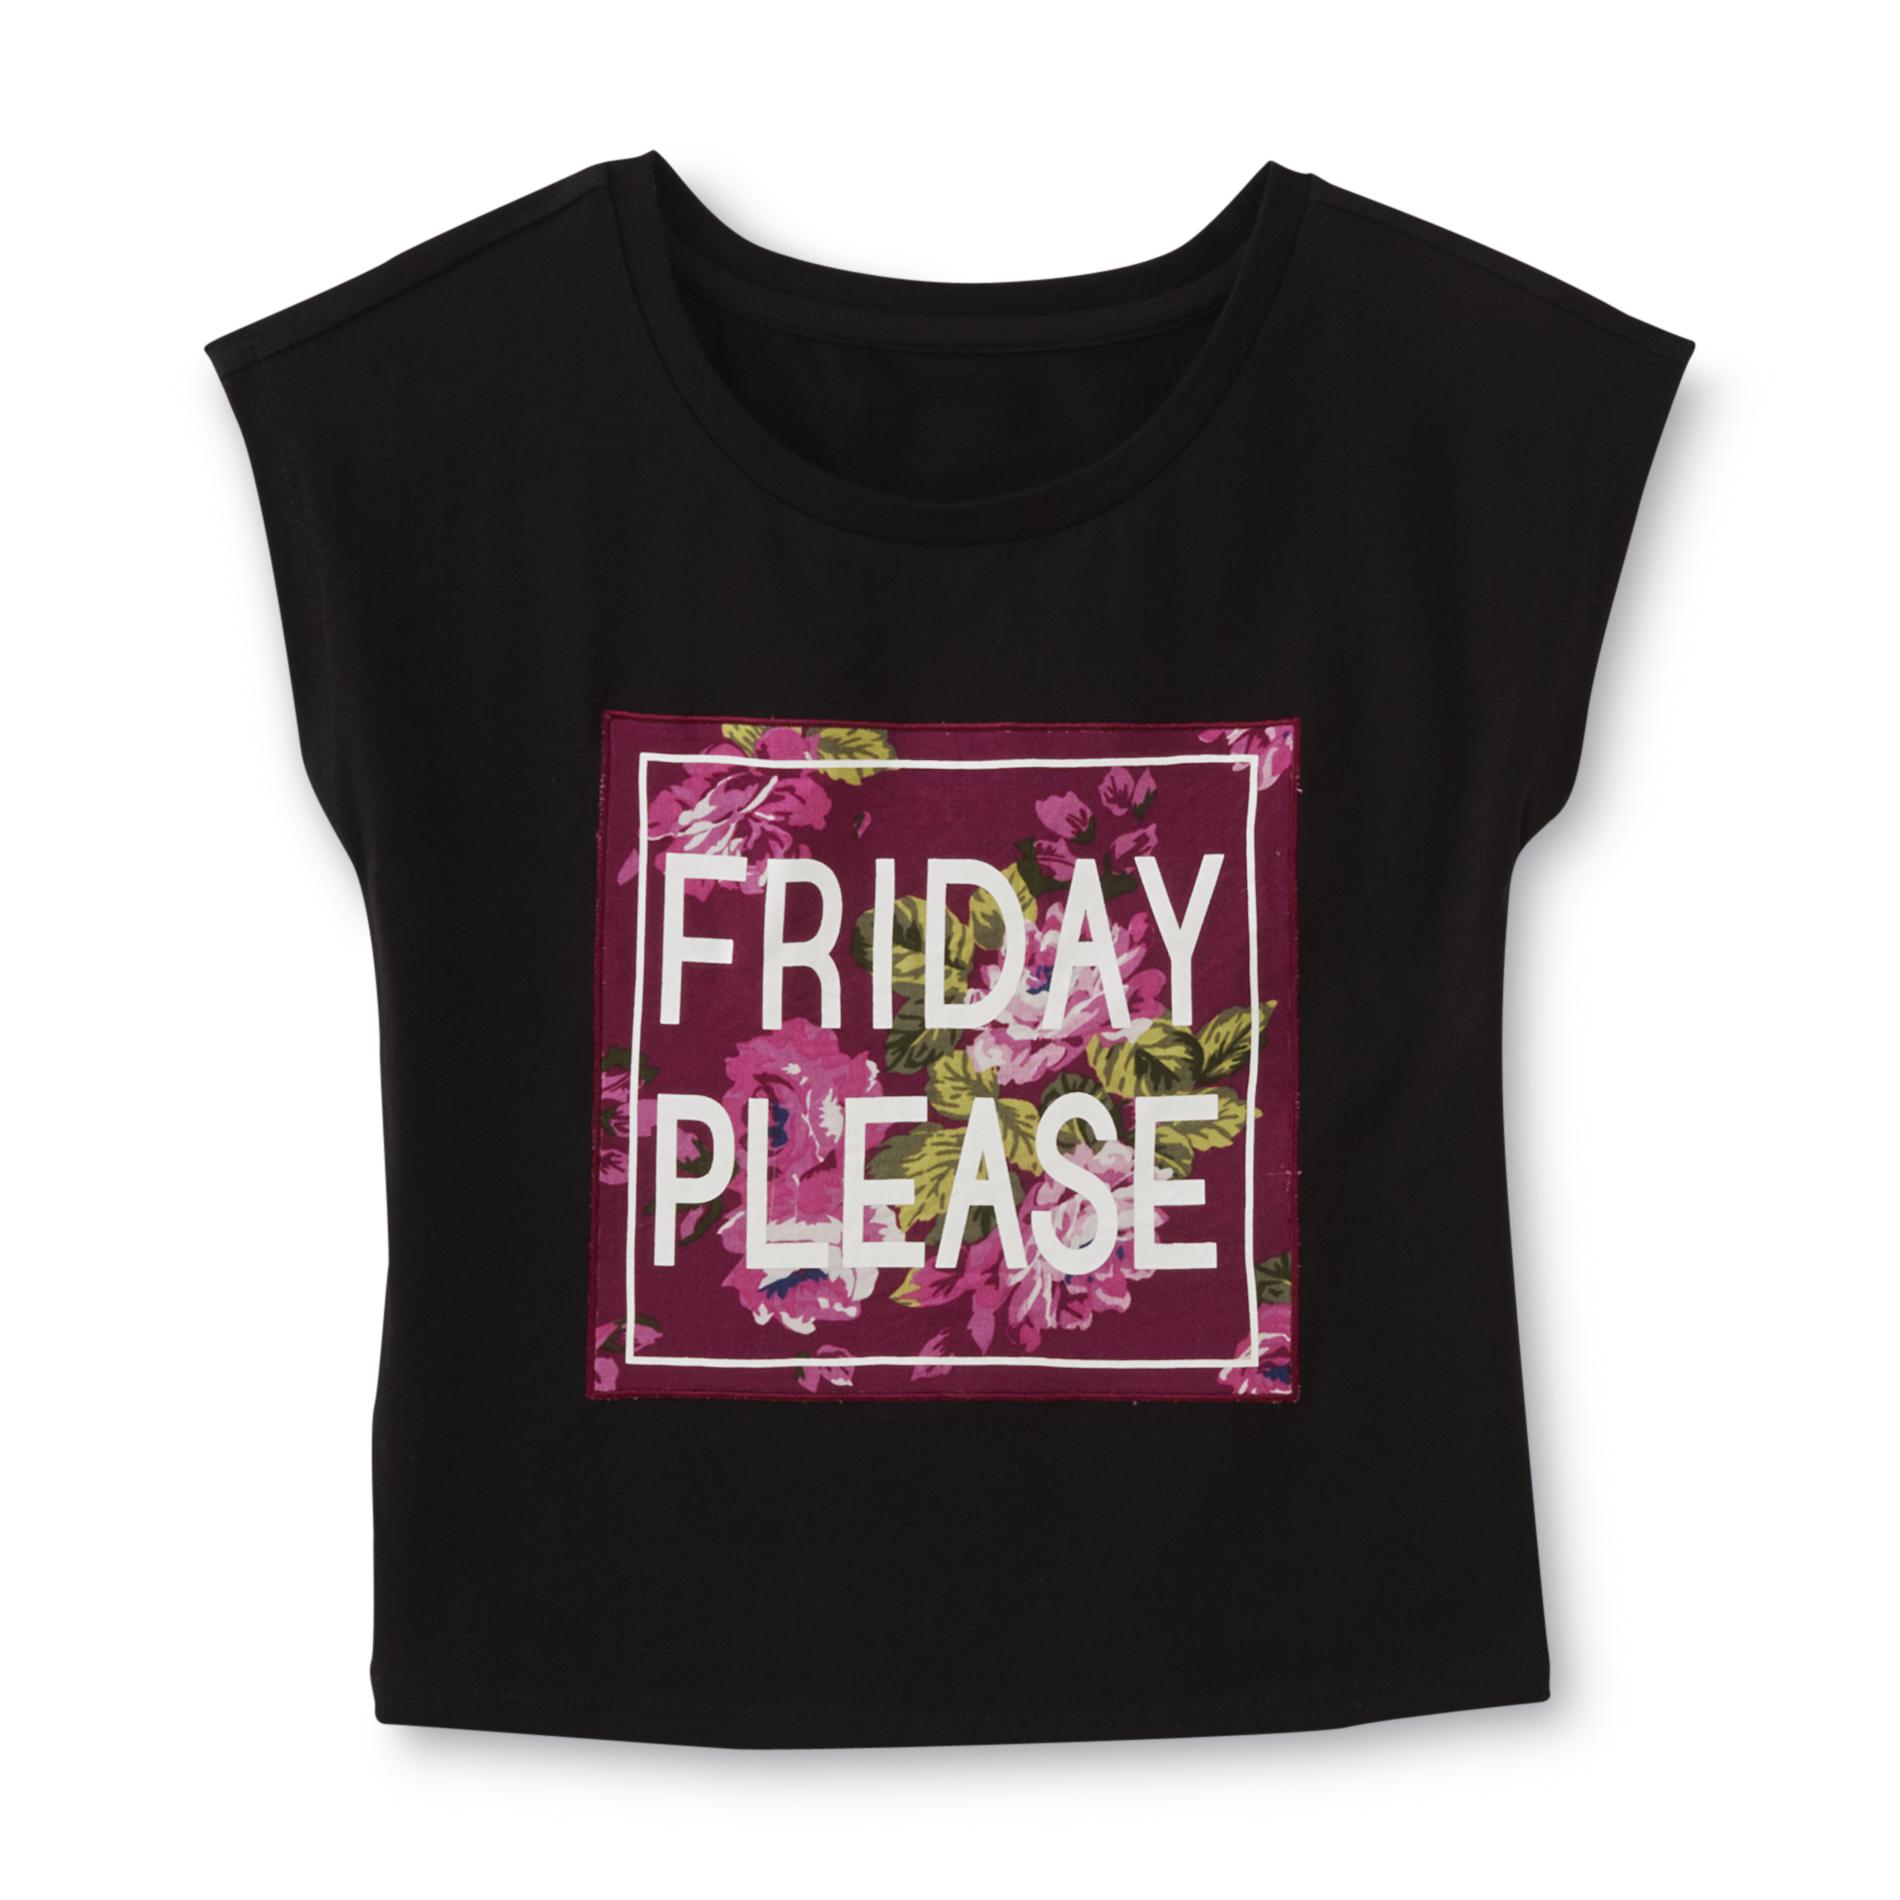 Route 66 Girl's Graphic T-Shirt - Friday Please